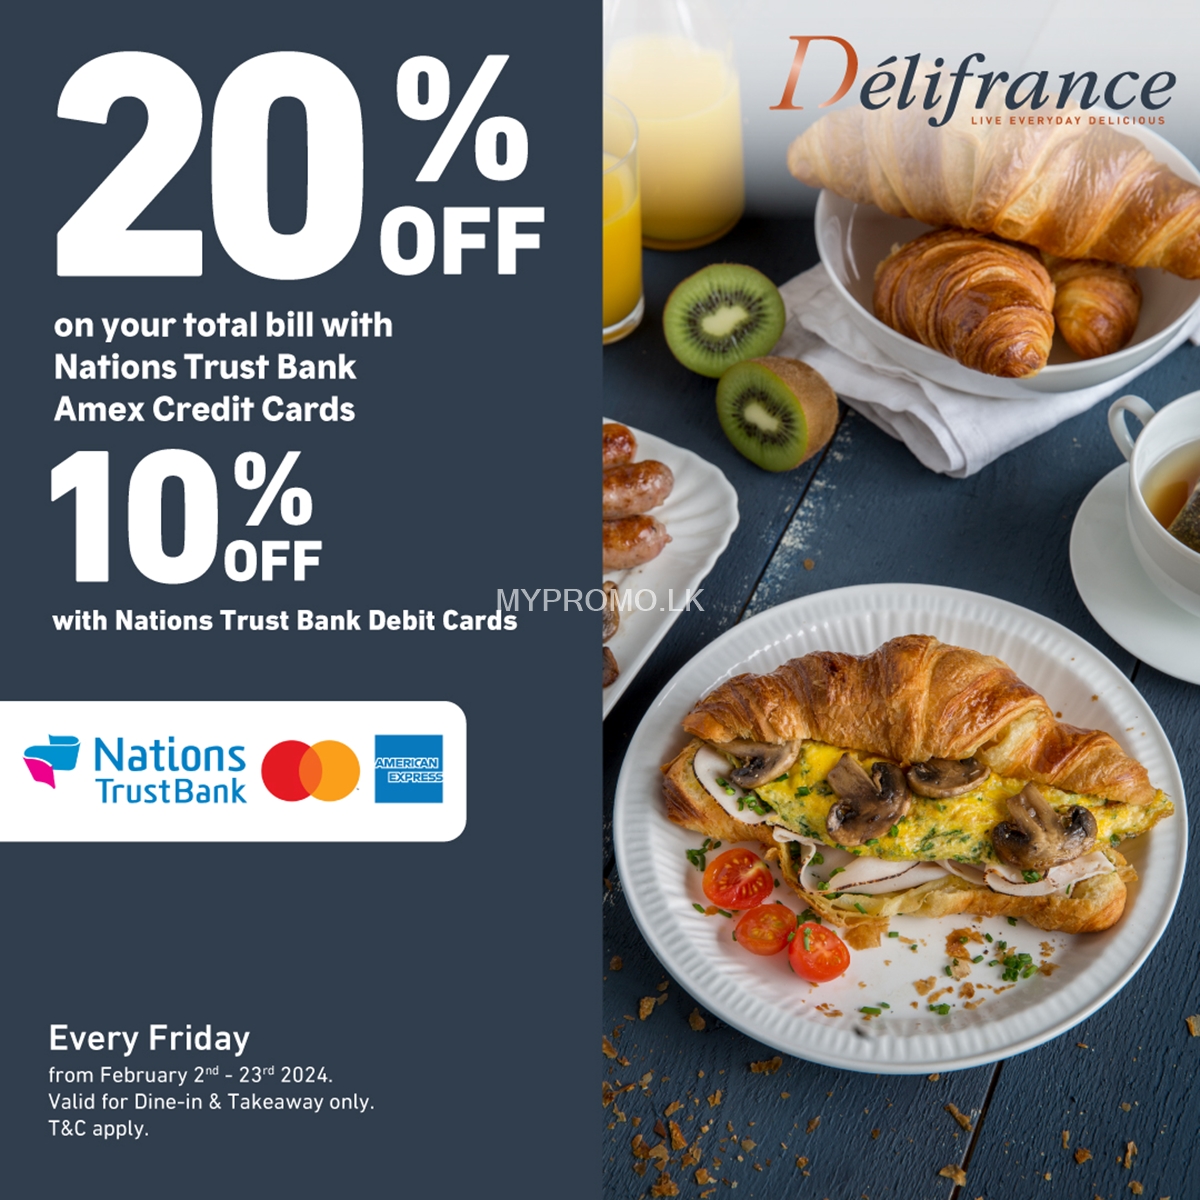 Enjoy up to 20% off for Nations trust bank cards at Delifrance